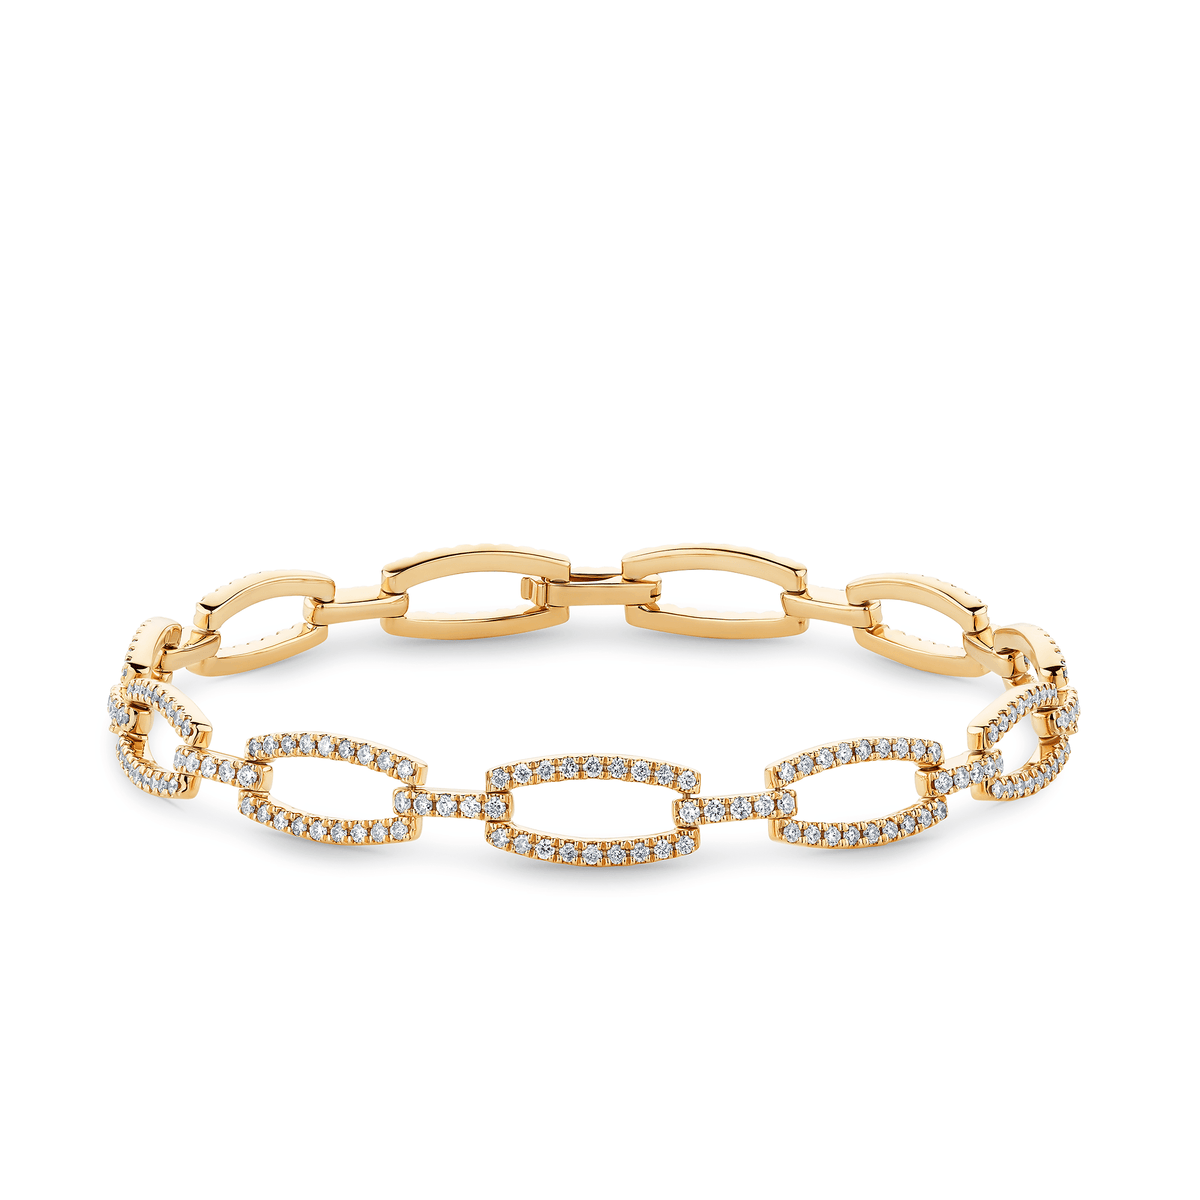 2ct TW Diamond Link Bracelet in 9ct Yellow Gold - Wallace Bishop